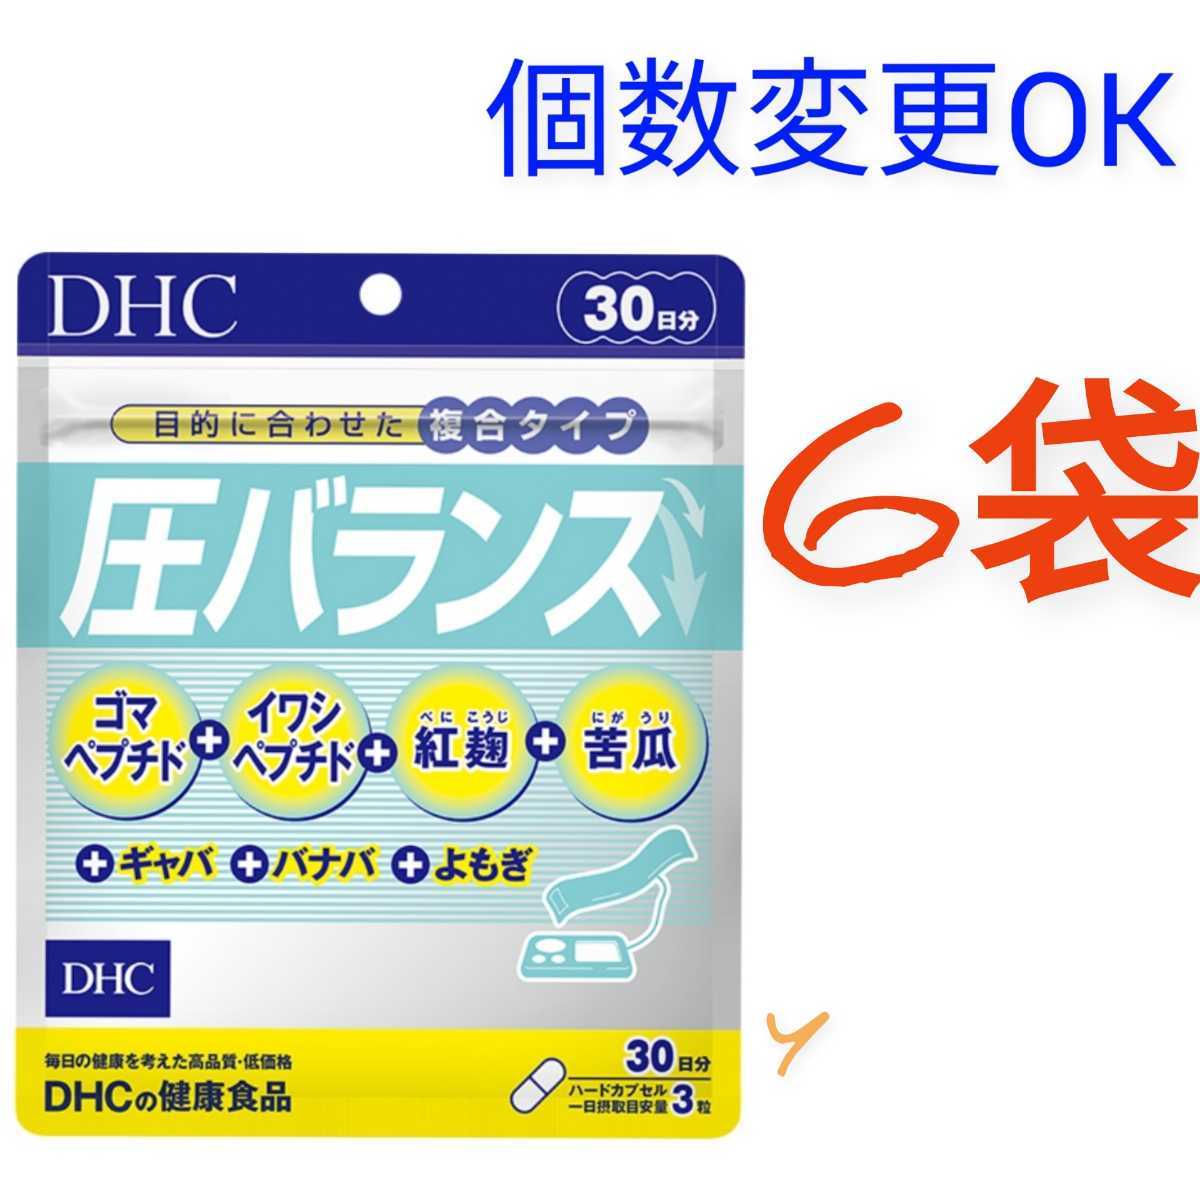 DHC ニュースリム30日分×2袋 個数変更可 Y｜PayPayフリマ